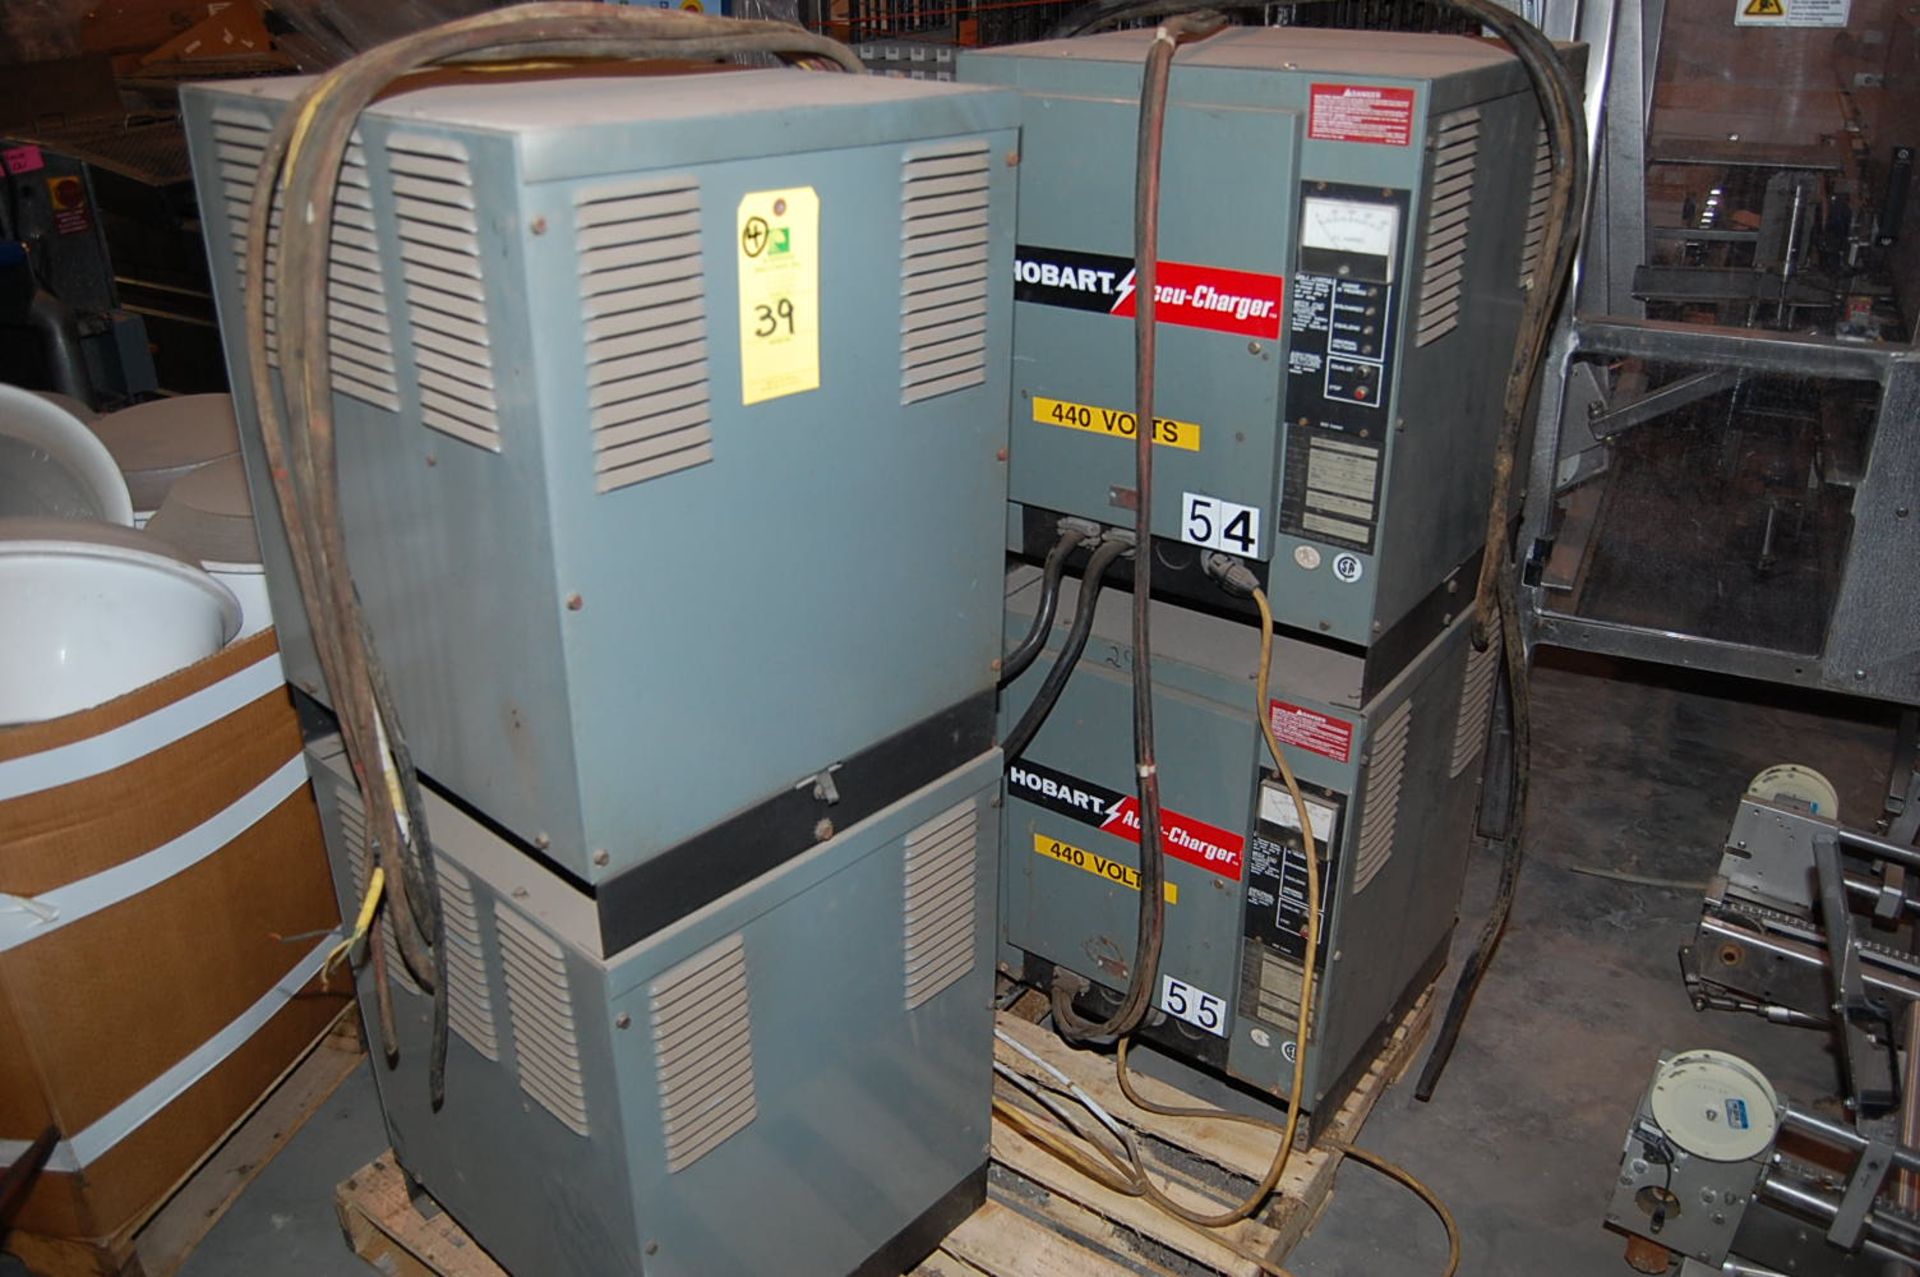 (4) Hobart Accu-Charger Electric Battery Chargers, Rated 6 Cell/12 Volt Rigging fee: $50